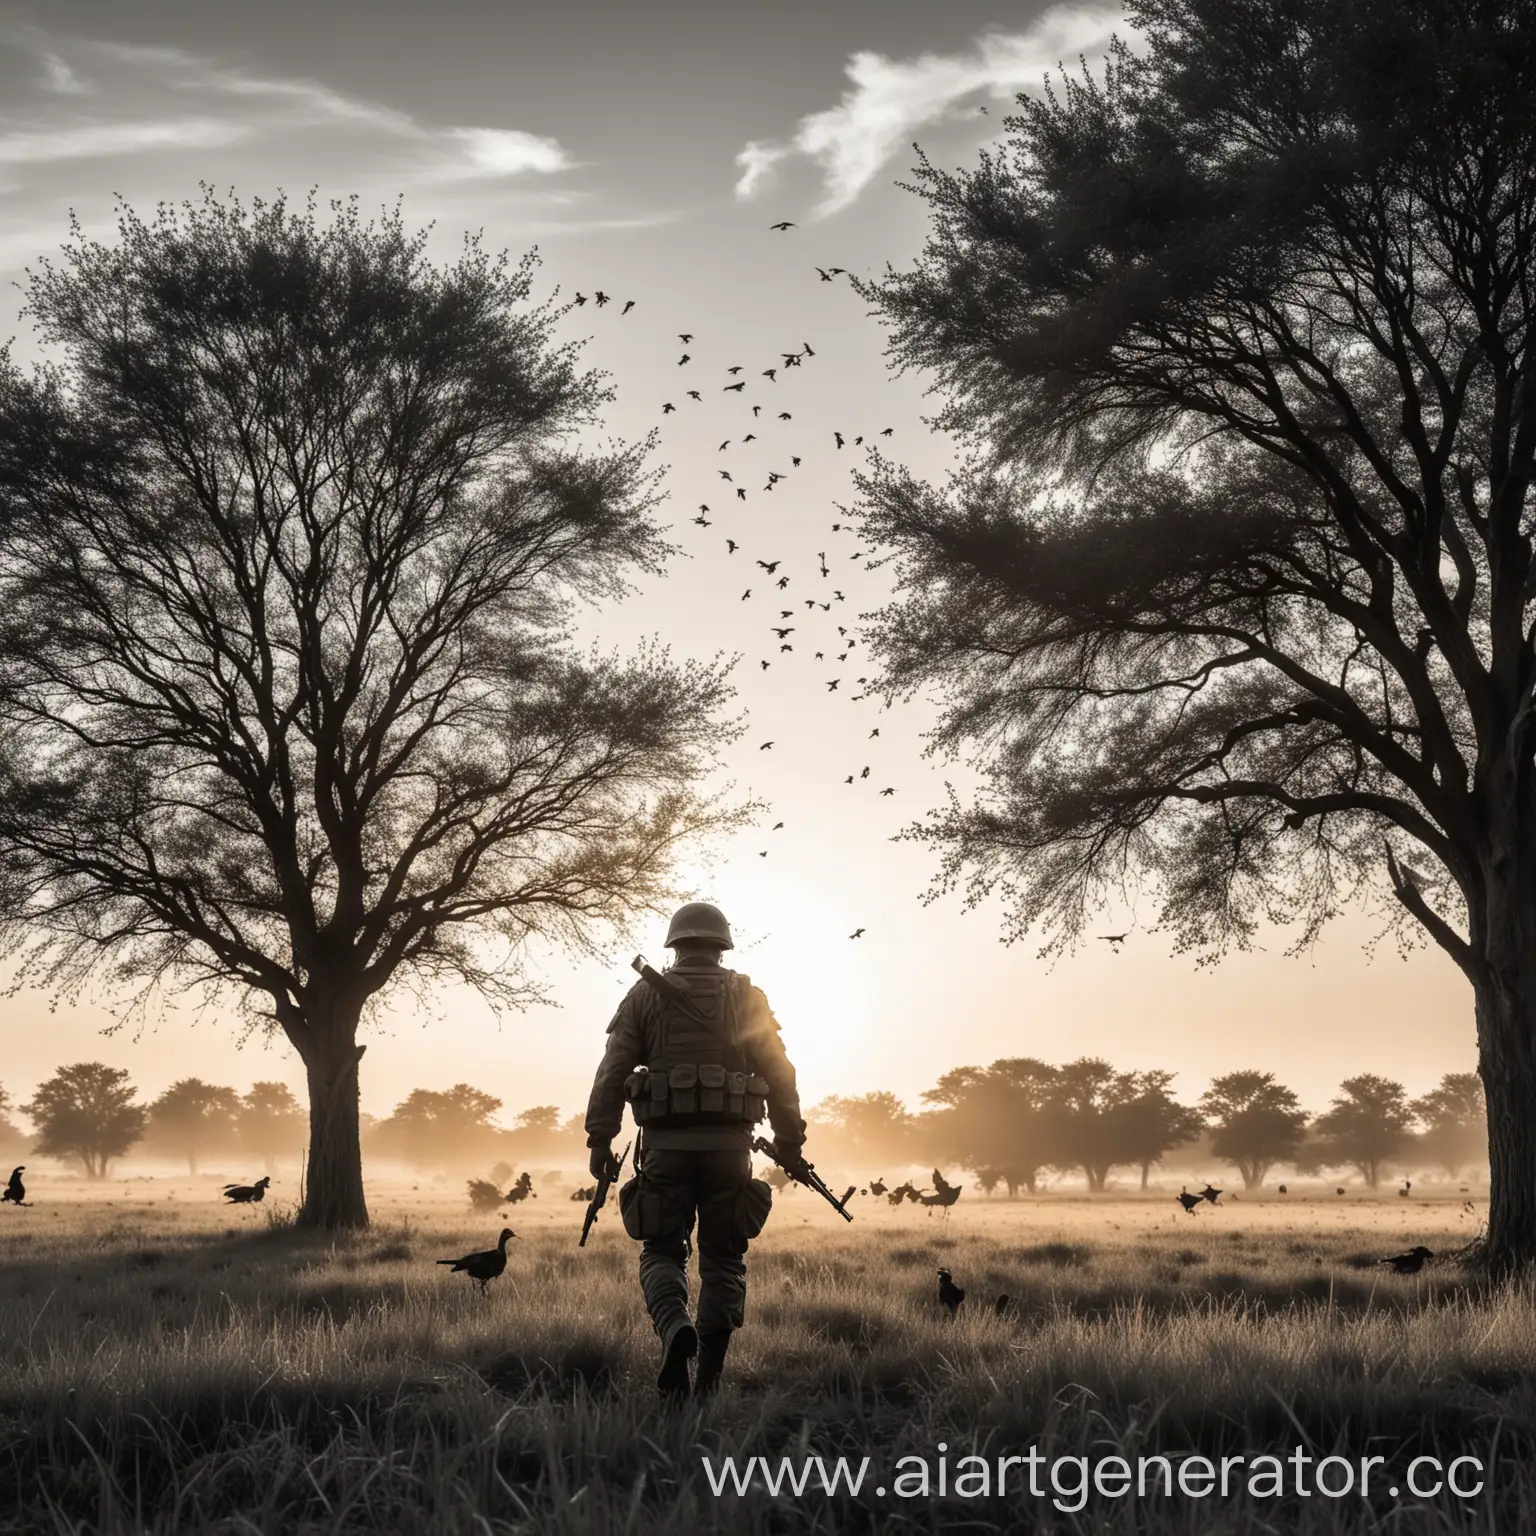 Modern-Soldier-with-AK47-Walking-into-Sunset-in-Field